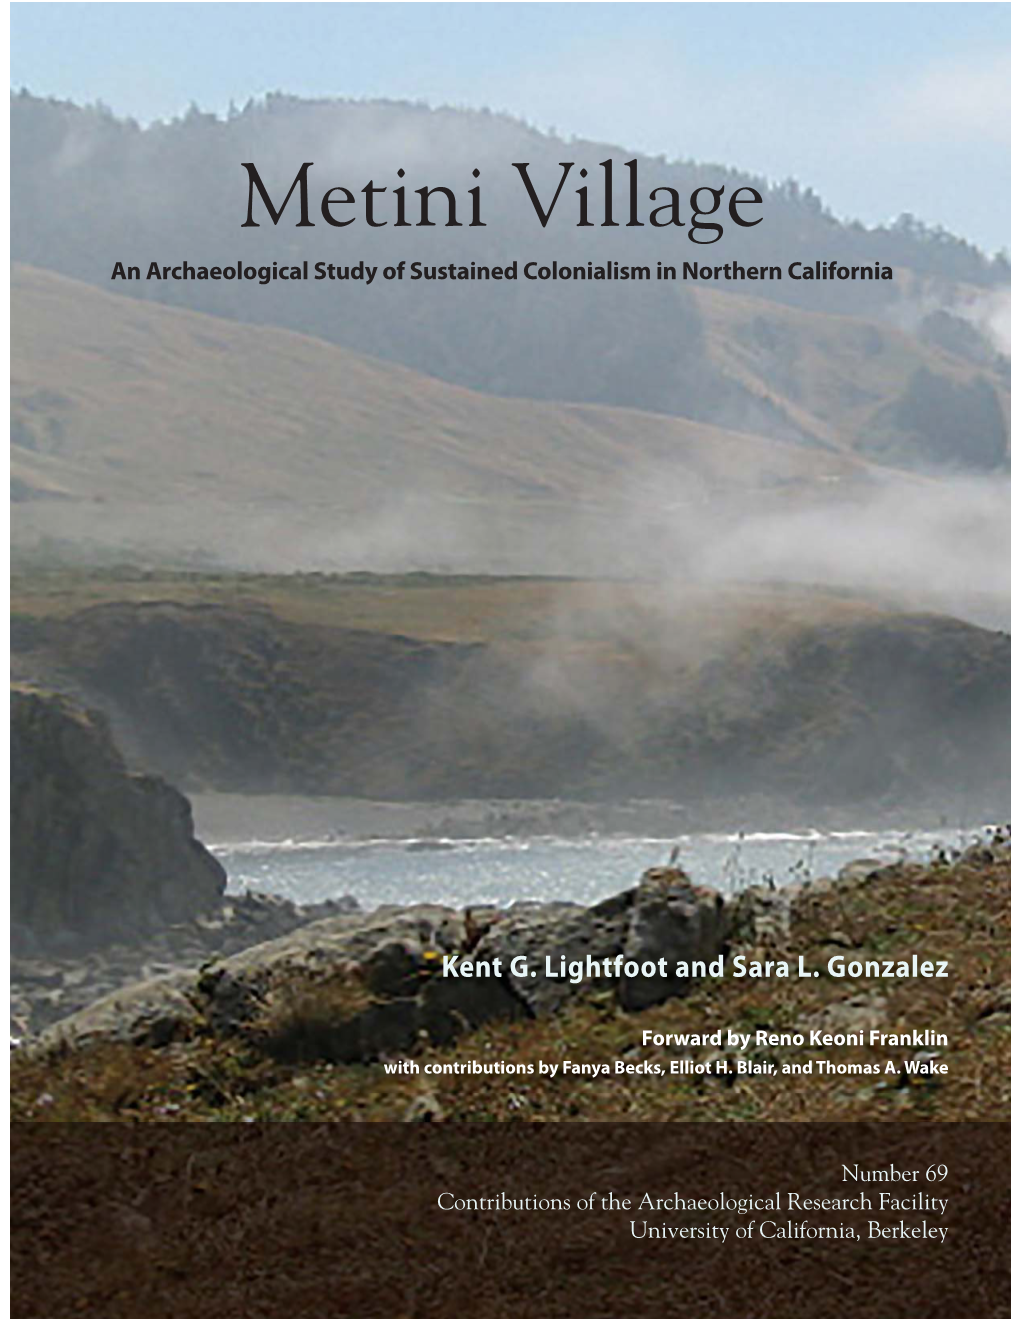 Metini Village an Archaeological Study of Sustained Colonialism in Northern California